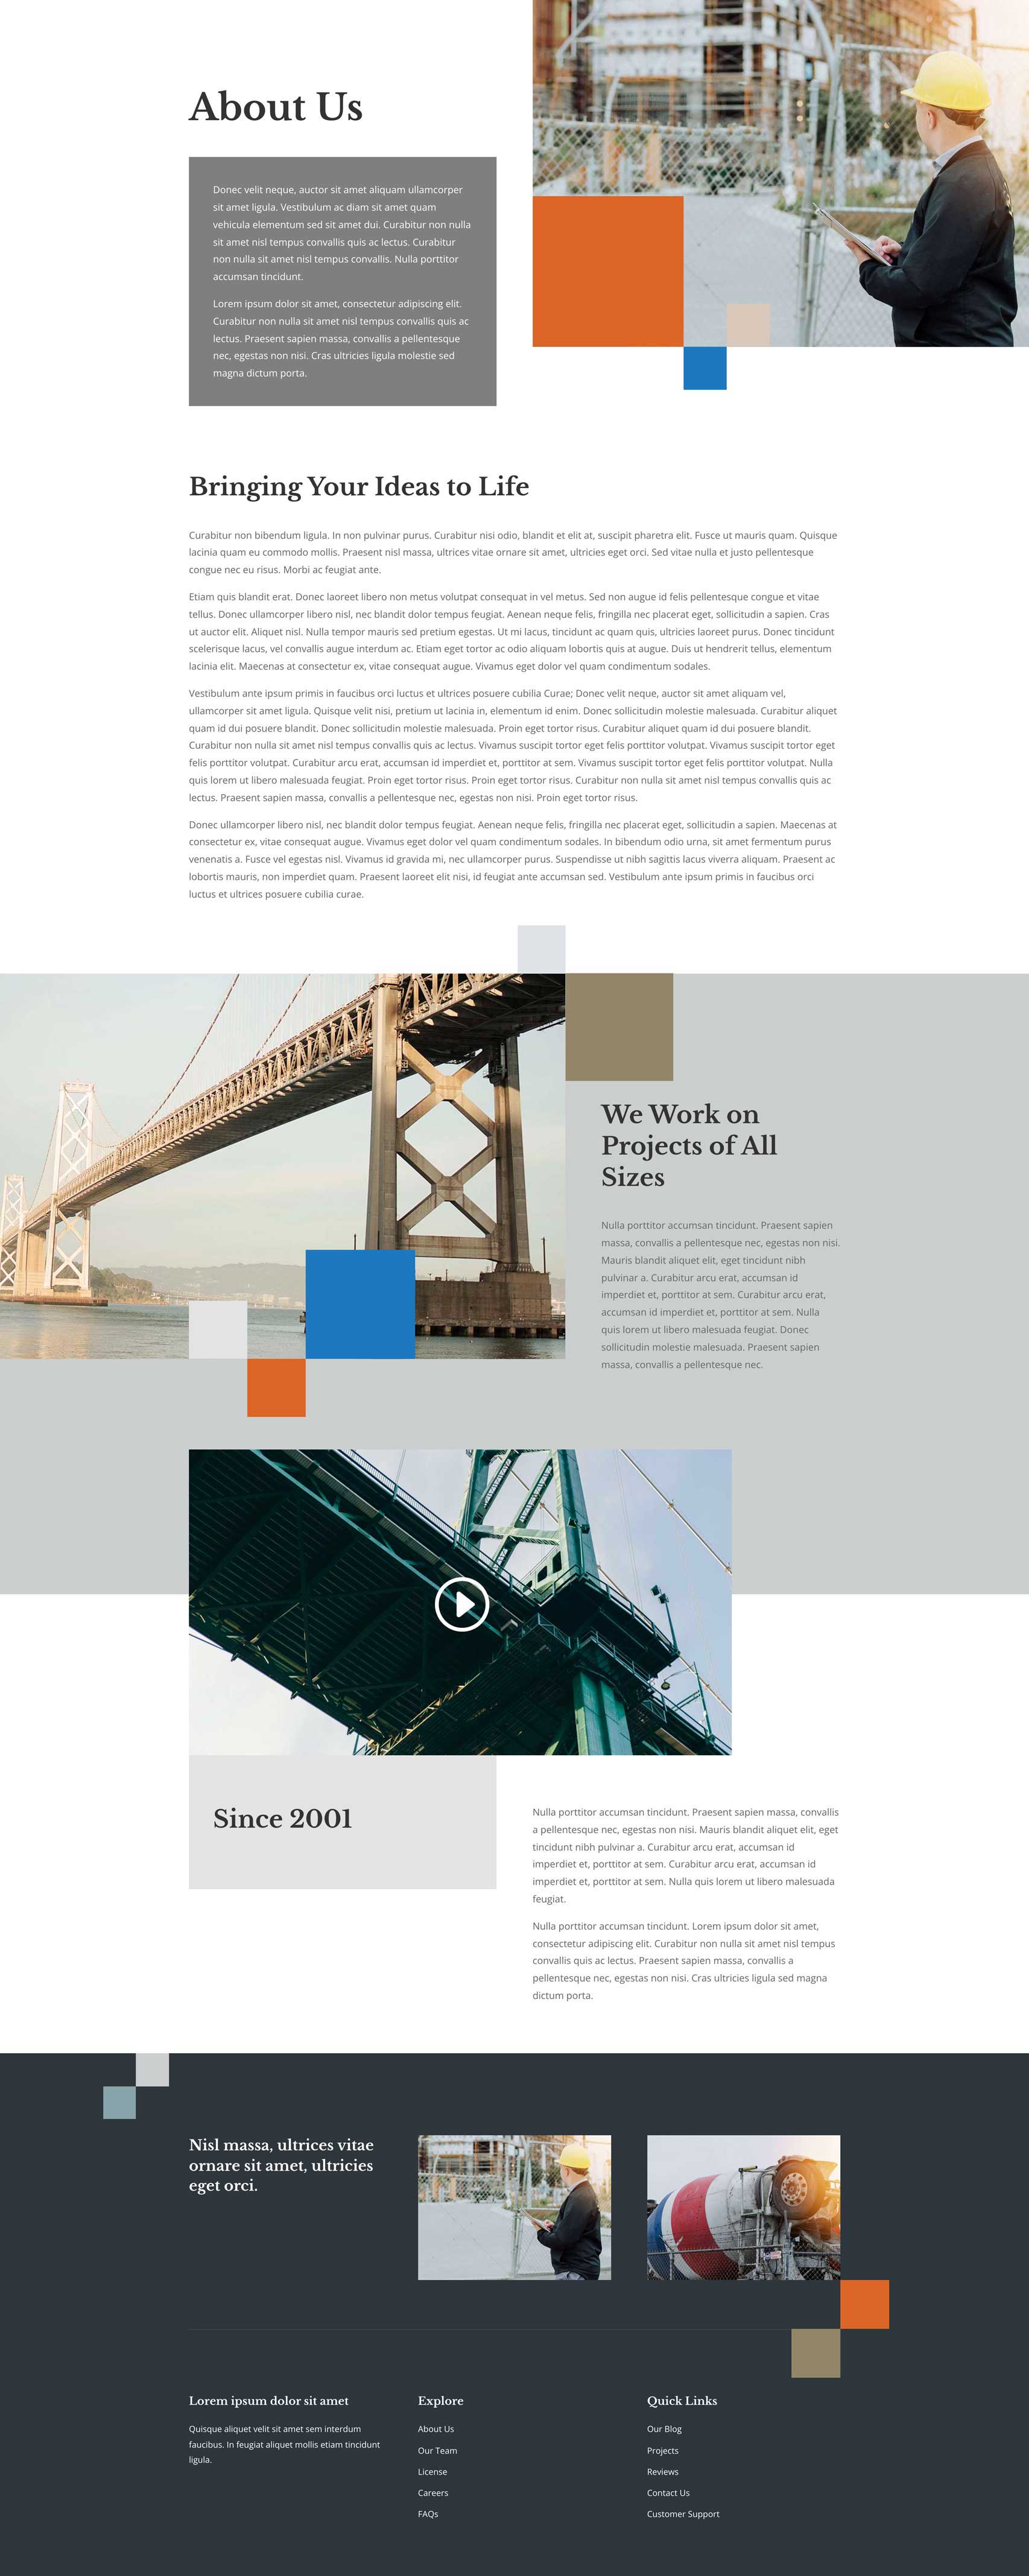 Civil Engineering Firm Layout Pack for Divi